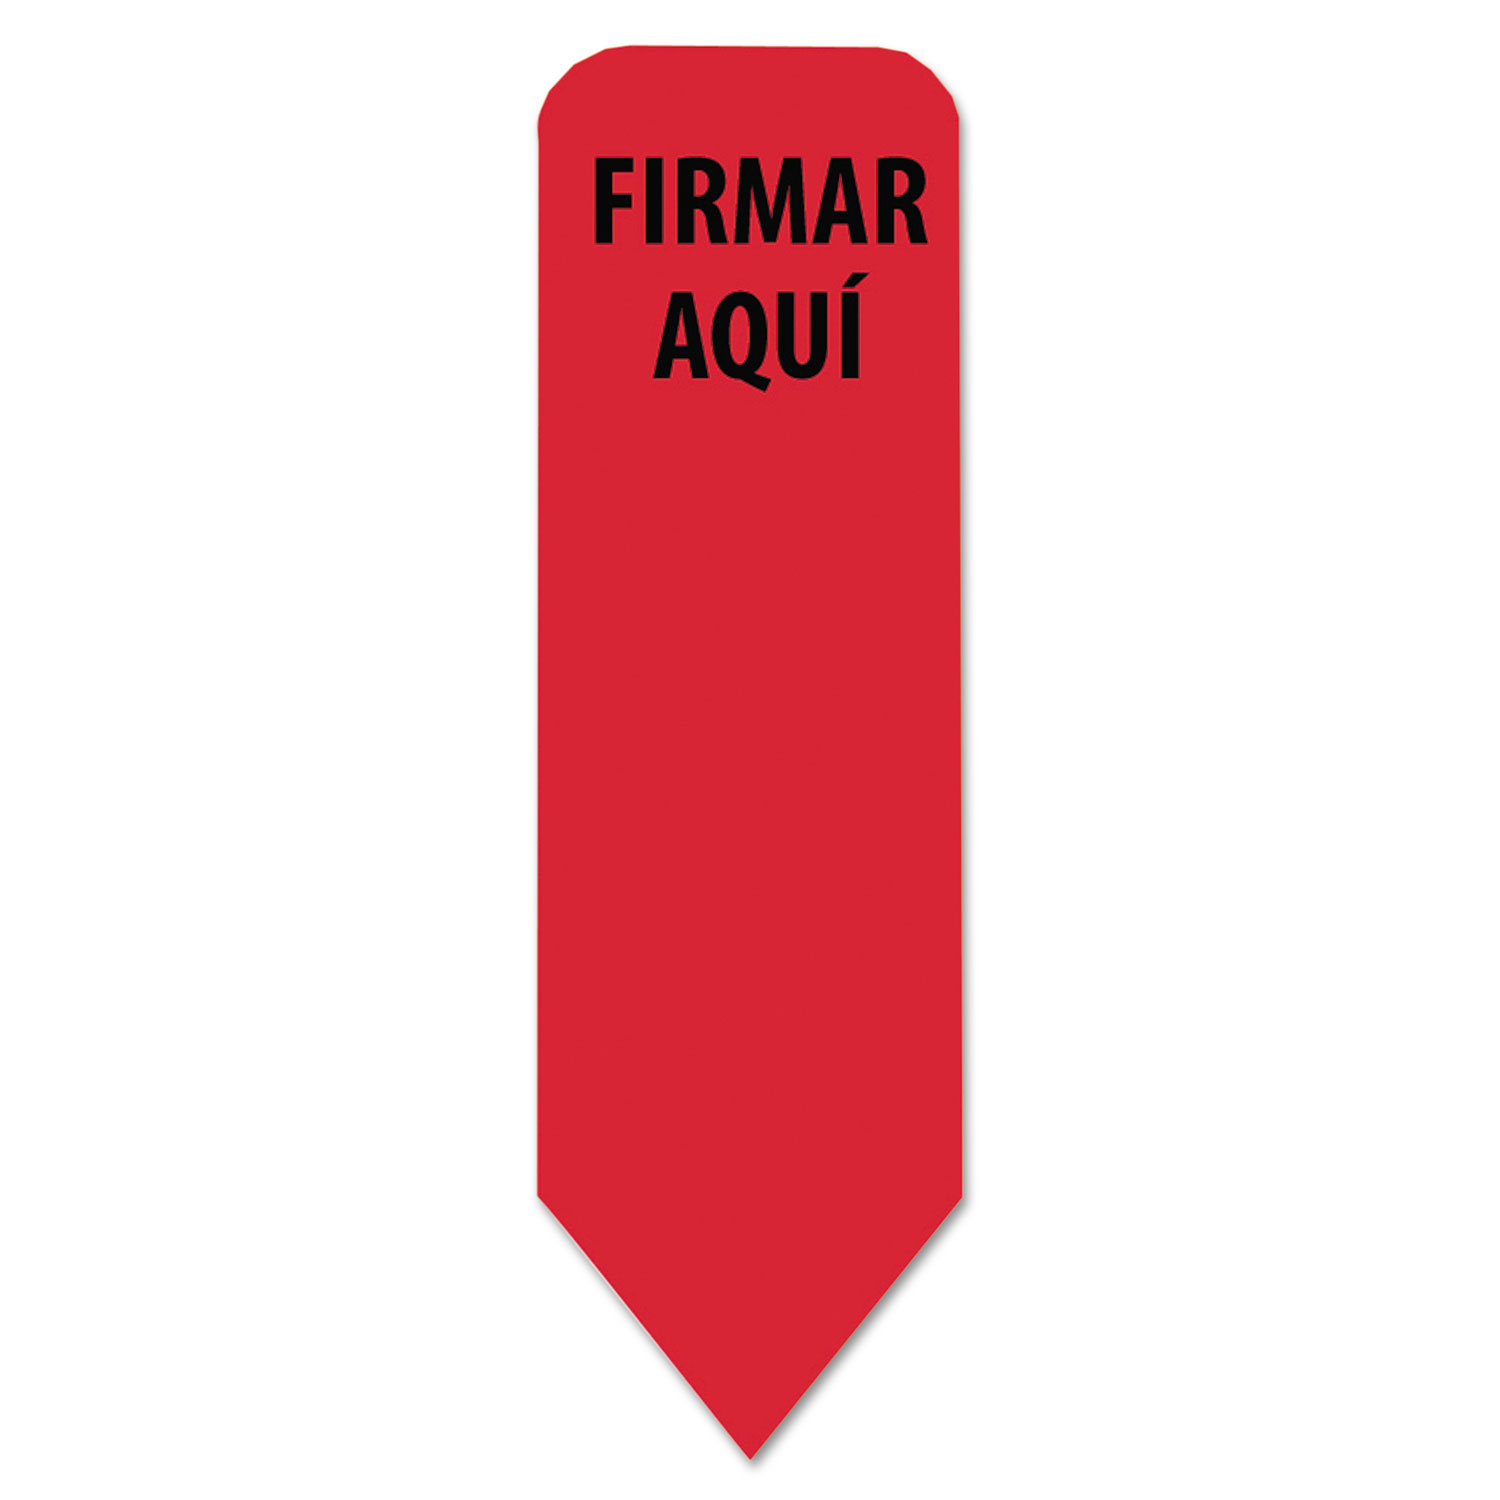 Arrow Message Page Flags in Dispenser, FIRMAR AQUI, Red, 120 flags/PK